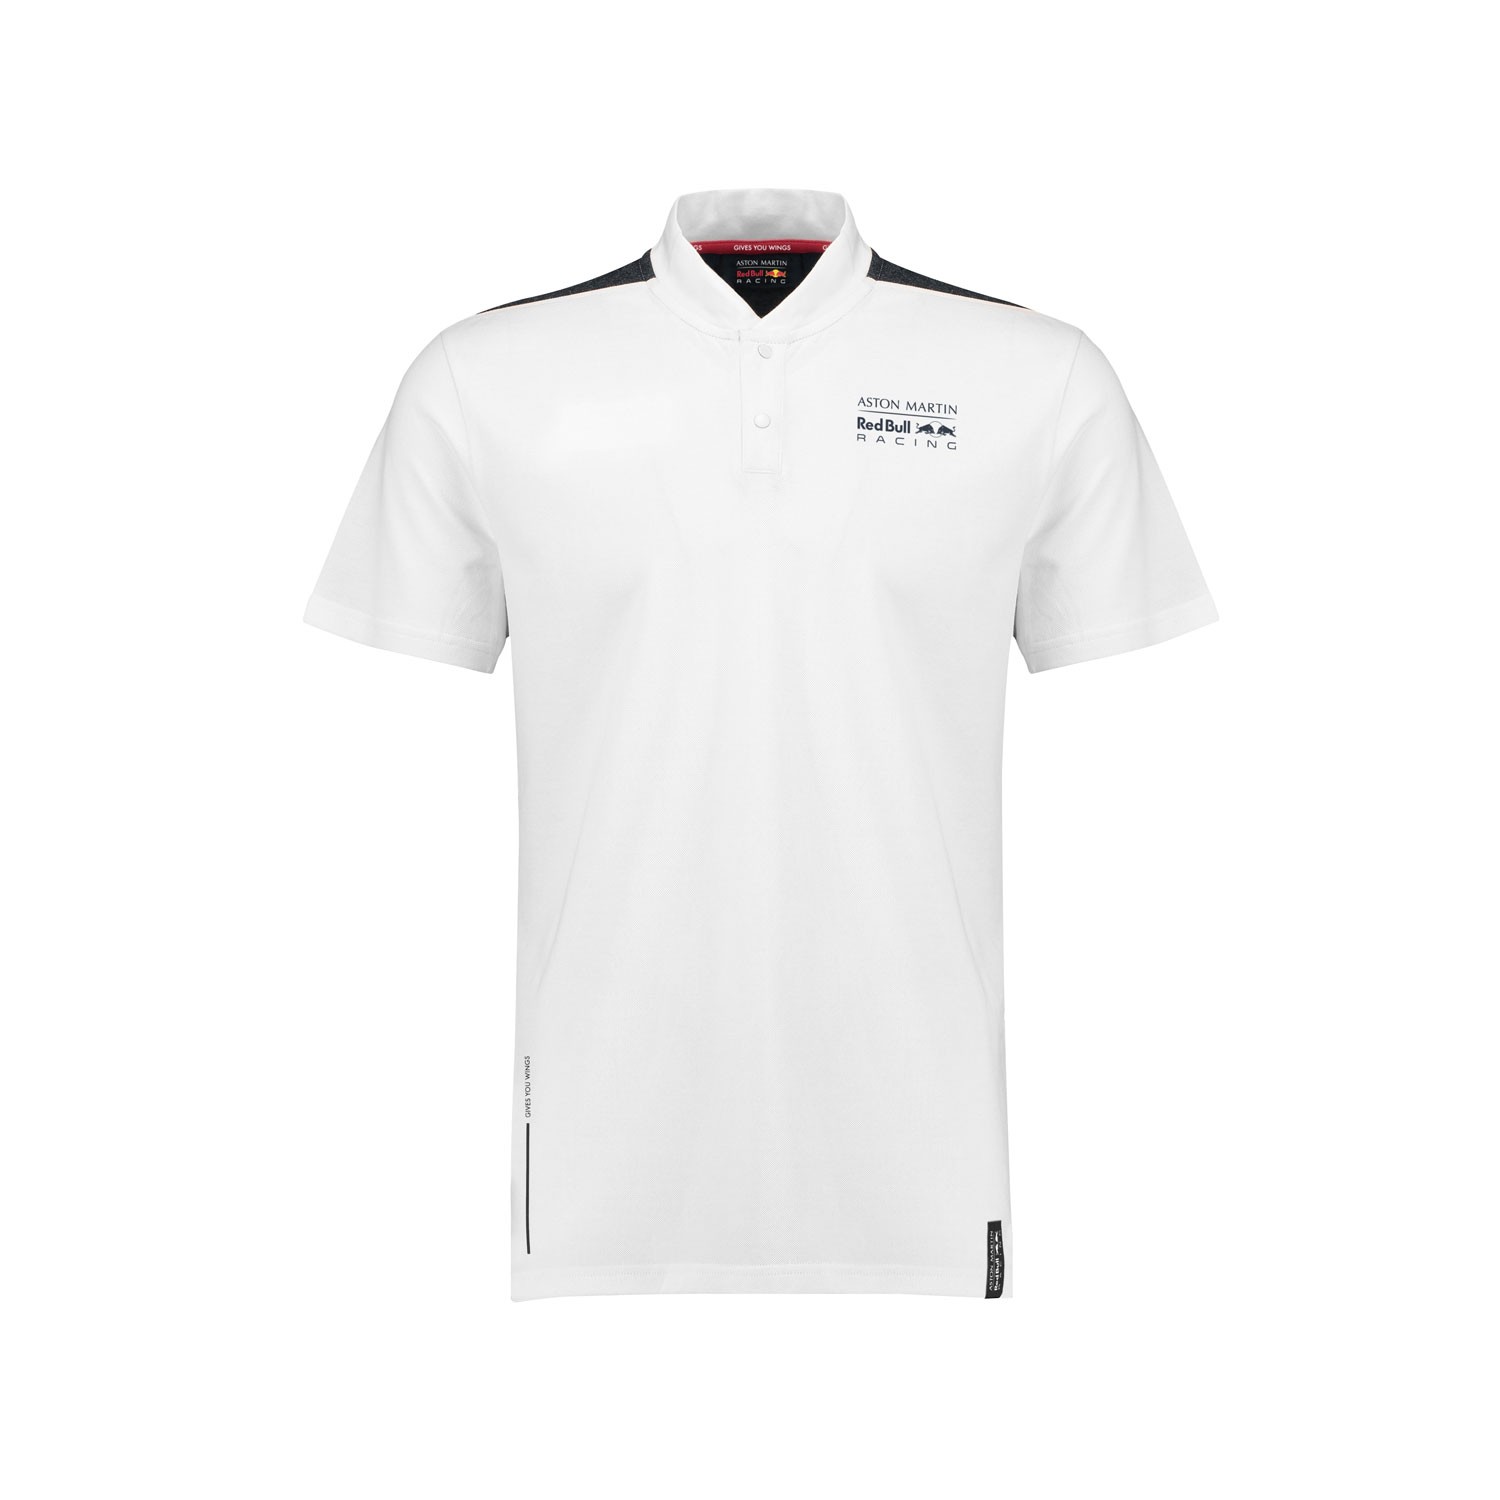 Red Bull Polo Shirt Formula 1 2018 Collection